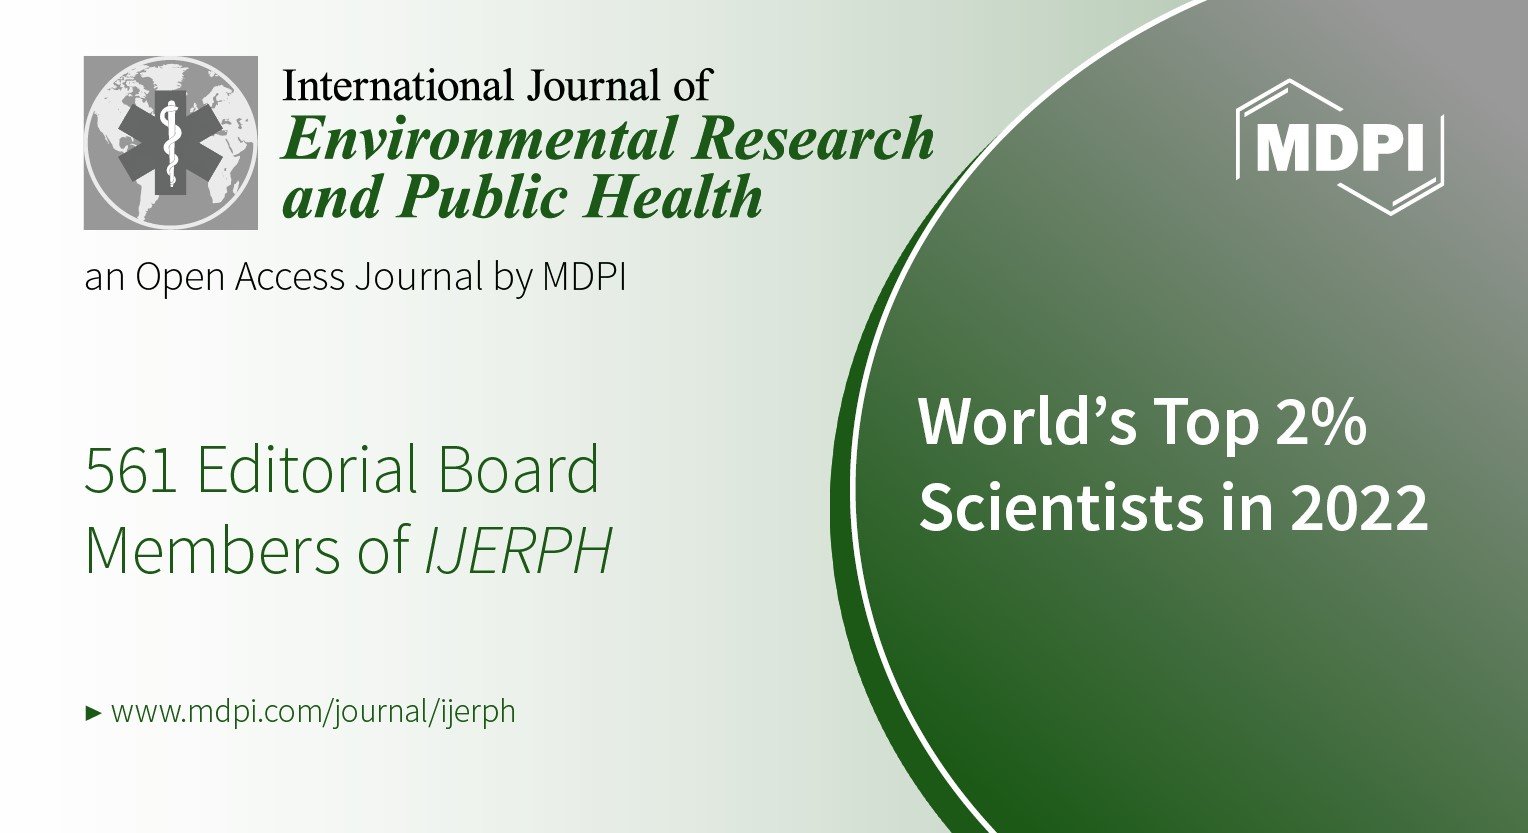 Editorial Board Members from the International Journal of Environmental Research and Public Health Featured among the World’s Top 2% Scientists in 2022 